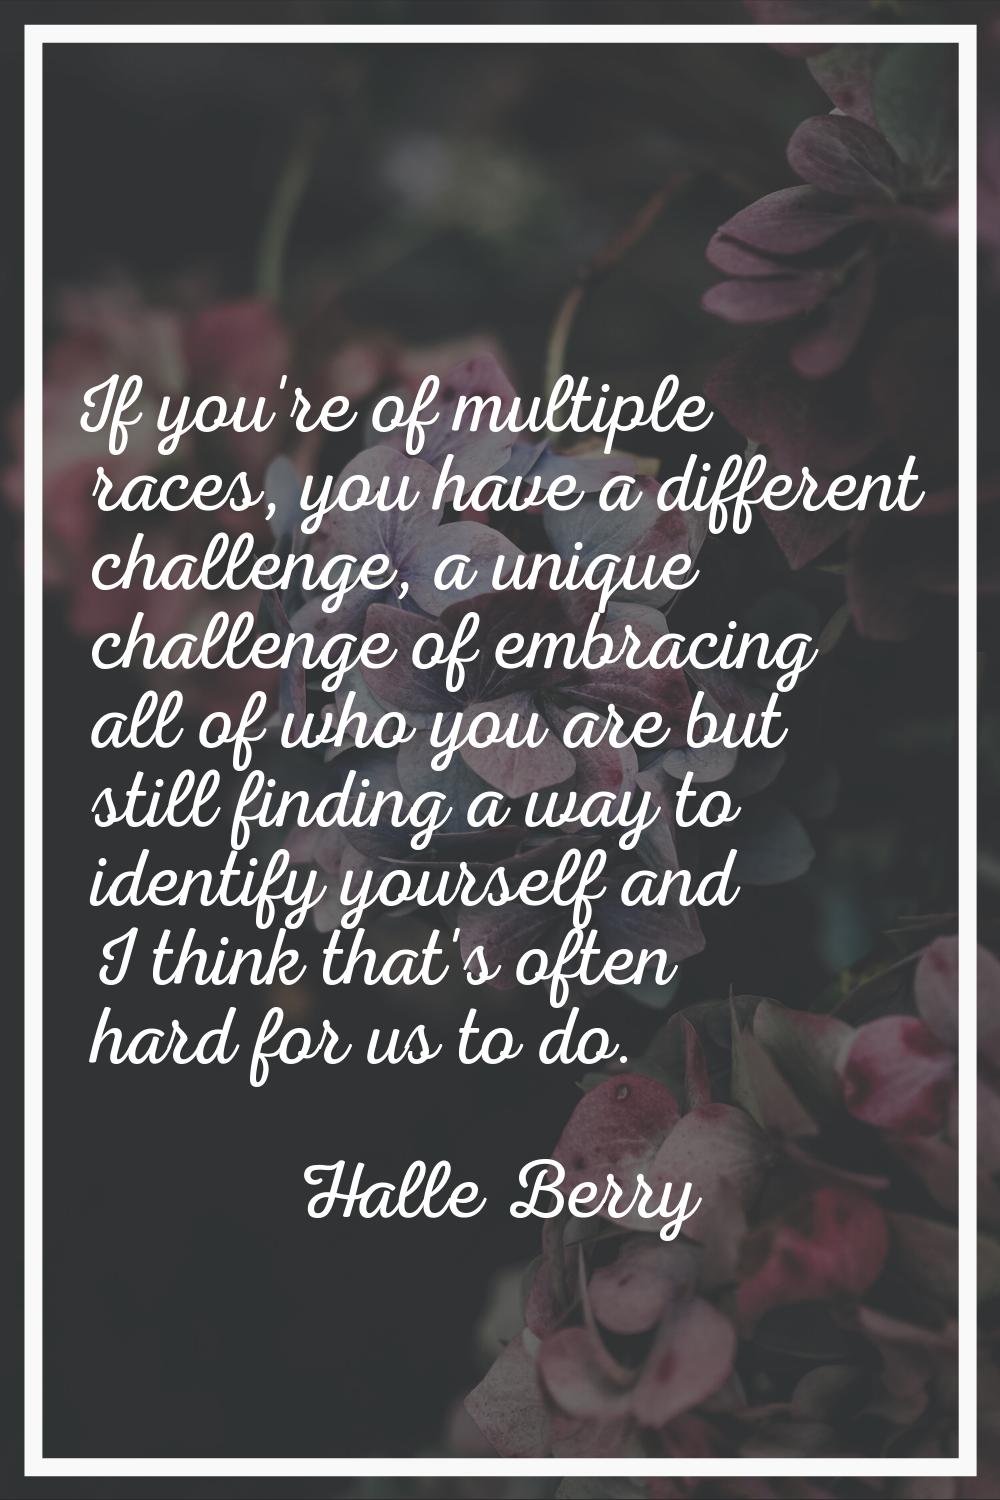 If you're of multiple races, you have a different challenge, a unique challenge of embracing all of